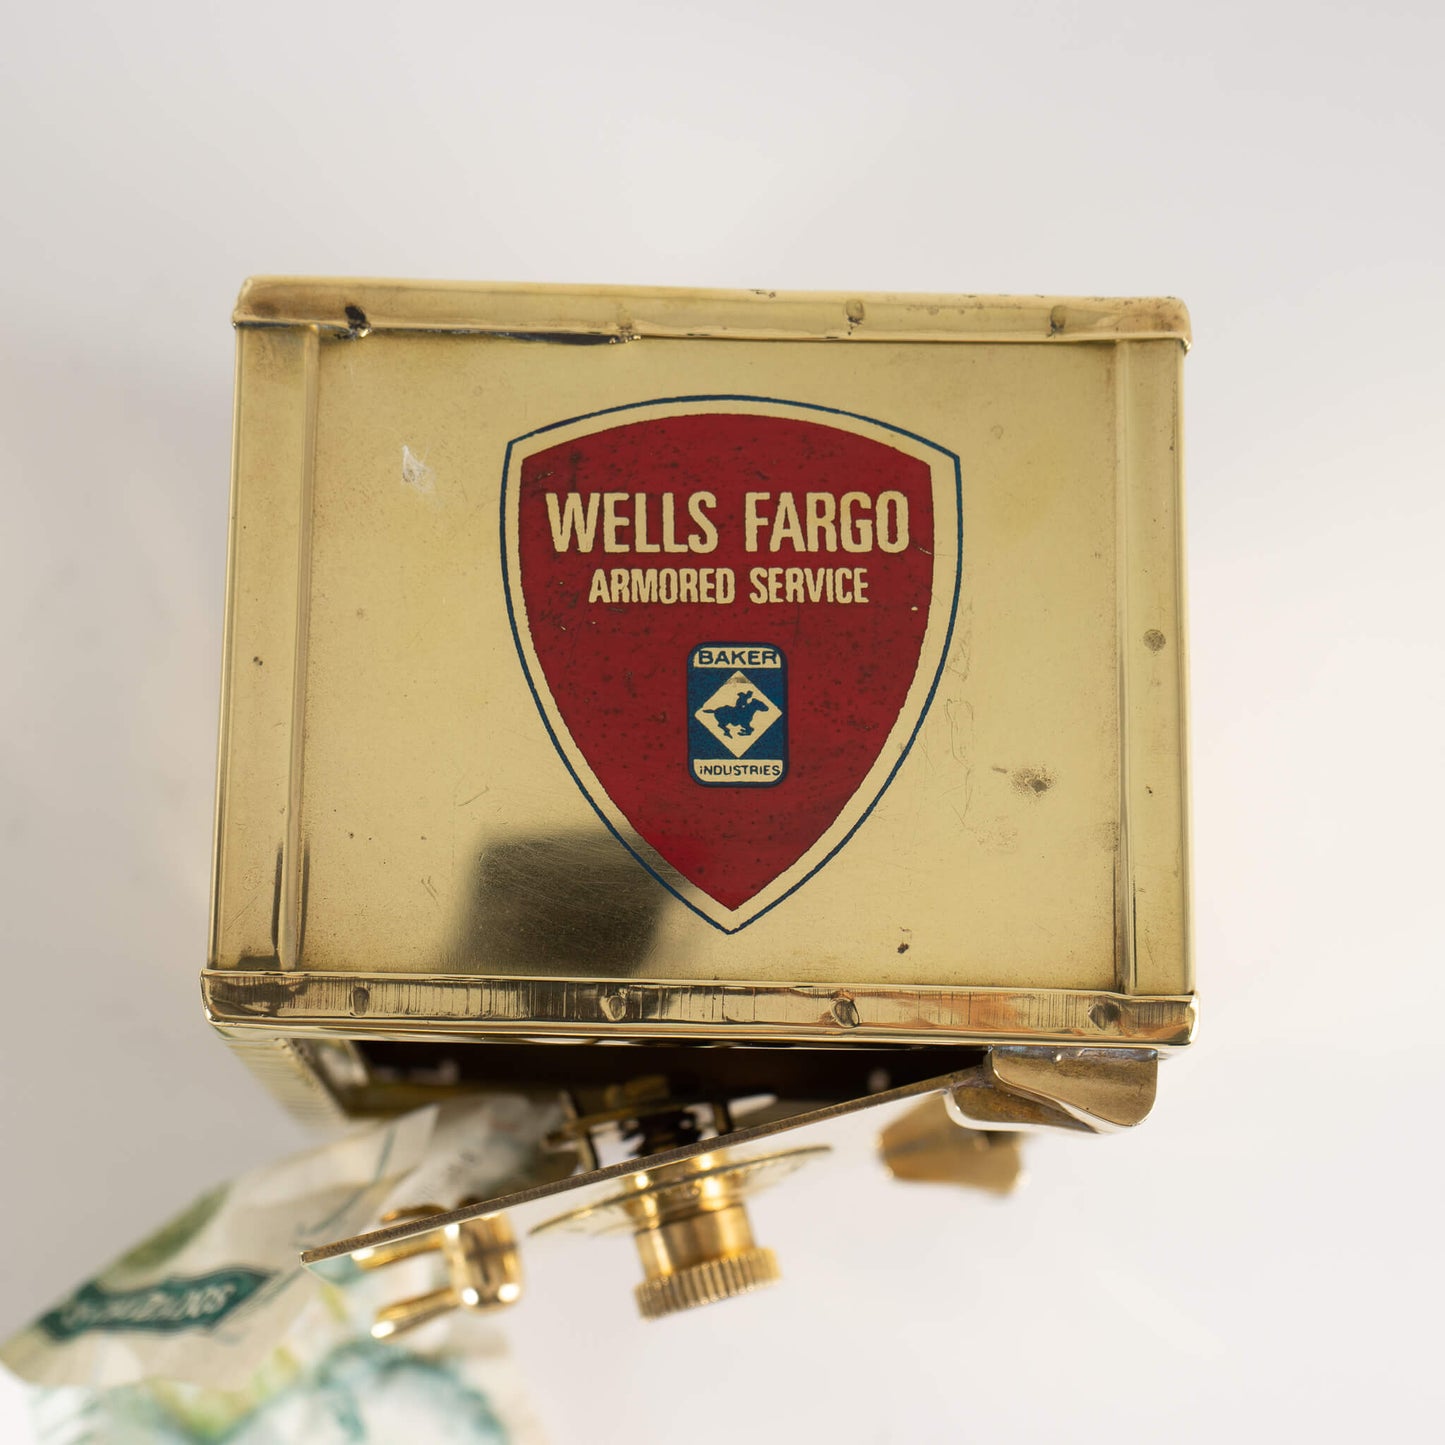 Load image into Gallery viewer, Vintage Brass Bank Safe Piggy Bank - Wells Fargo Armored Service
